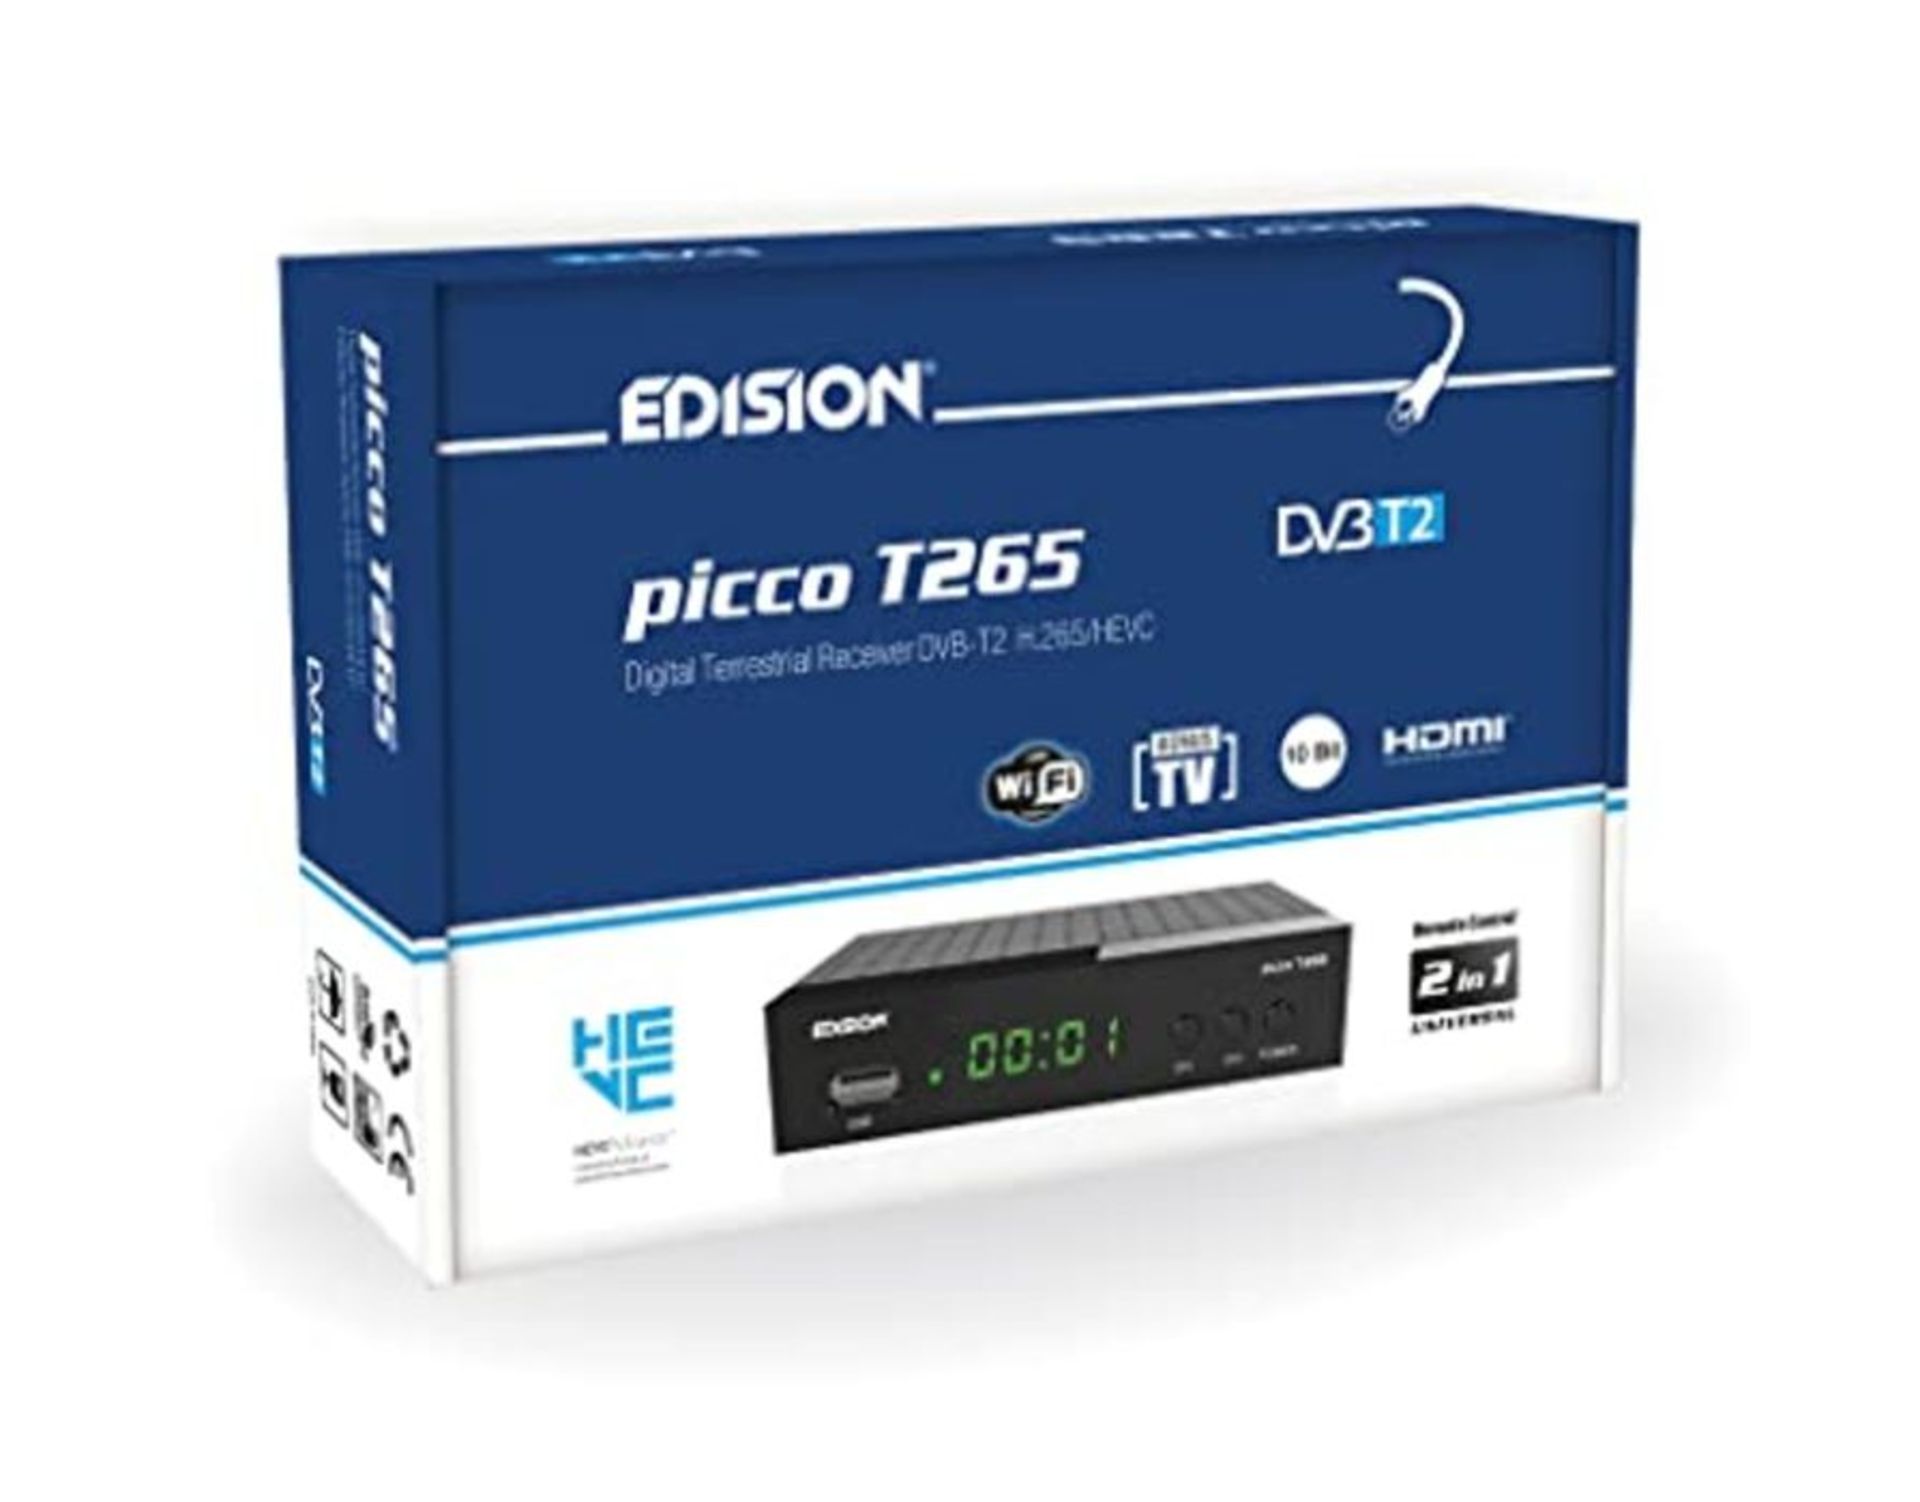 Edision PICCO T265, Full High Definition DVB-T2, H265 HEVC receiver, WiFi support, 2in